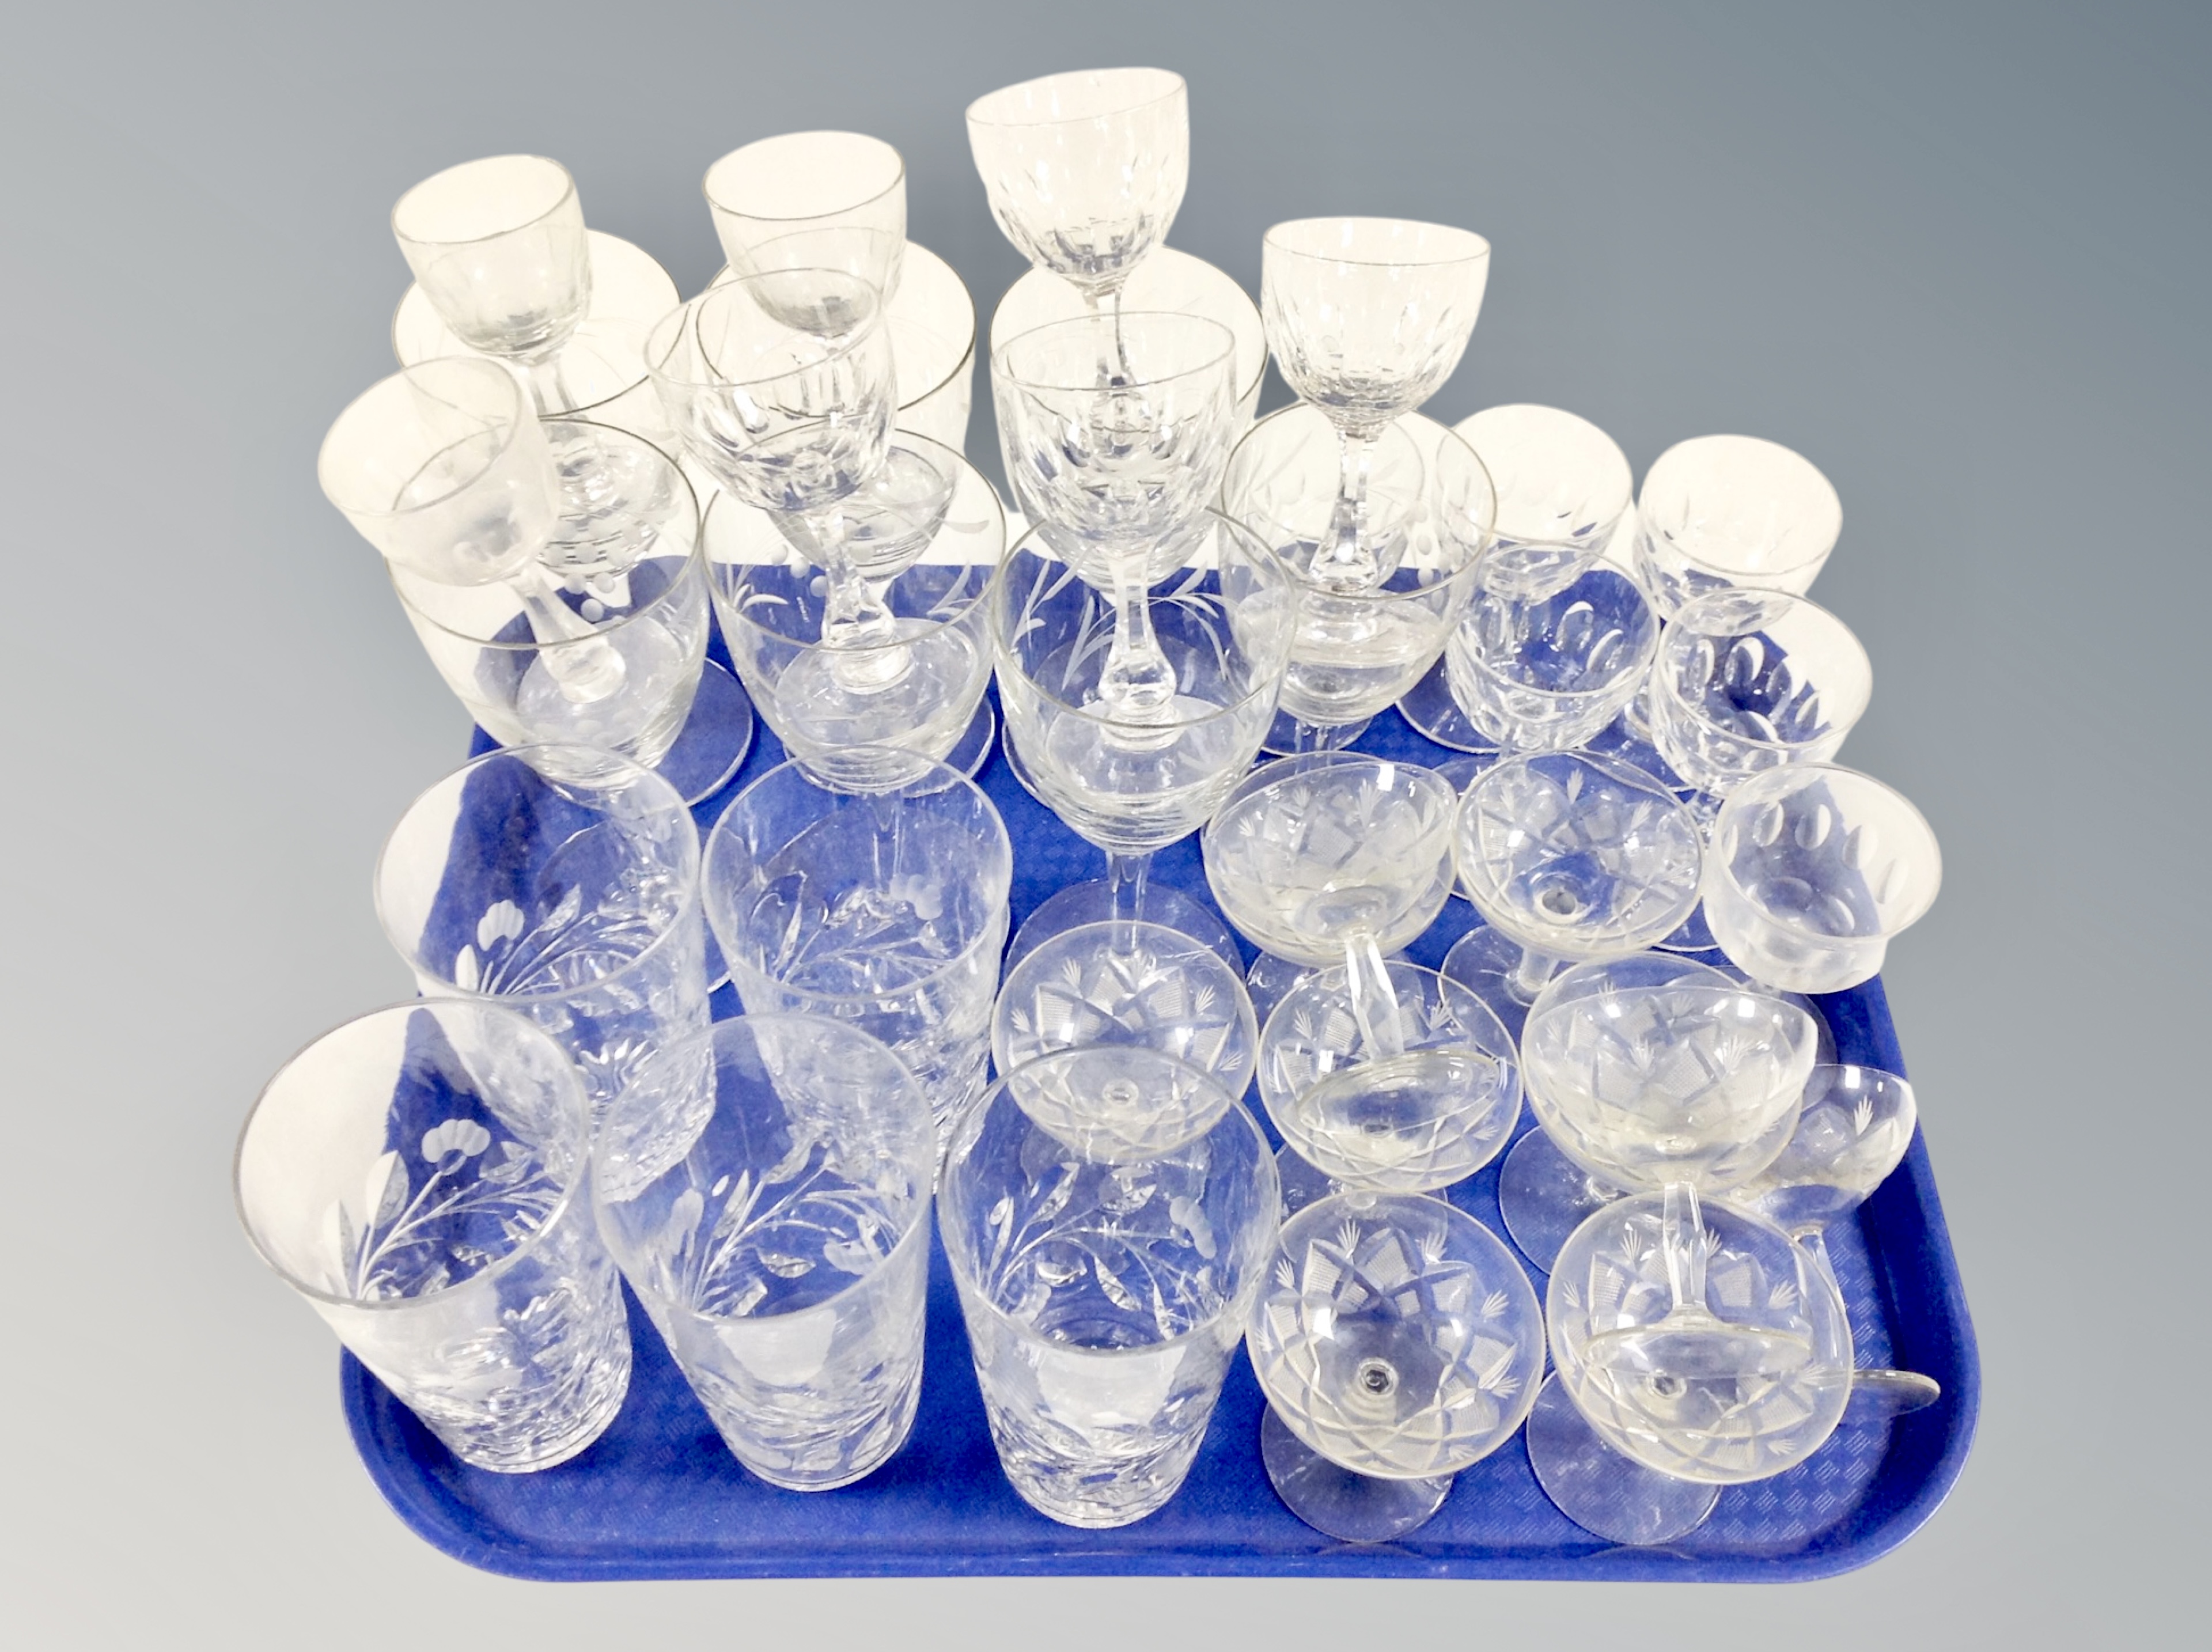 A tray of 20th century etched drinking glasses.